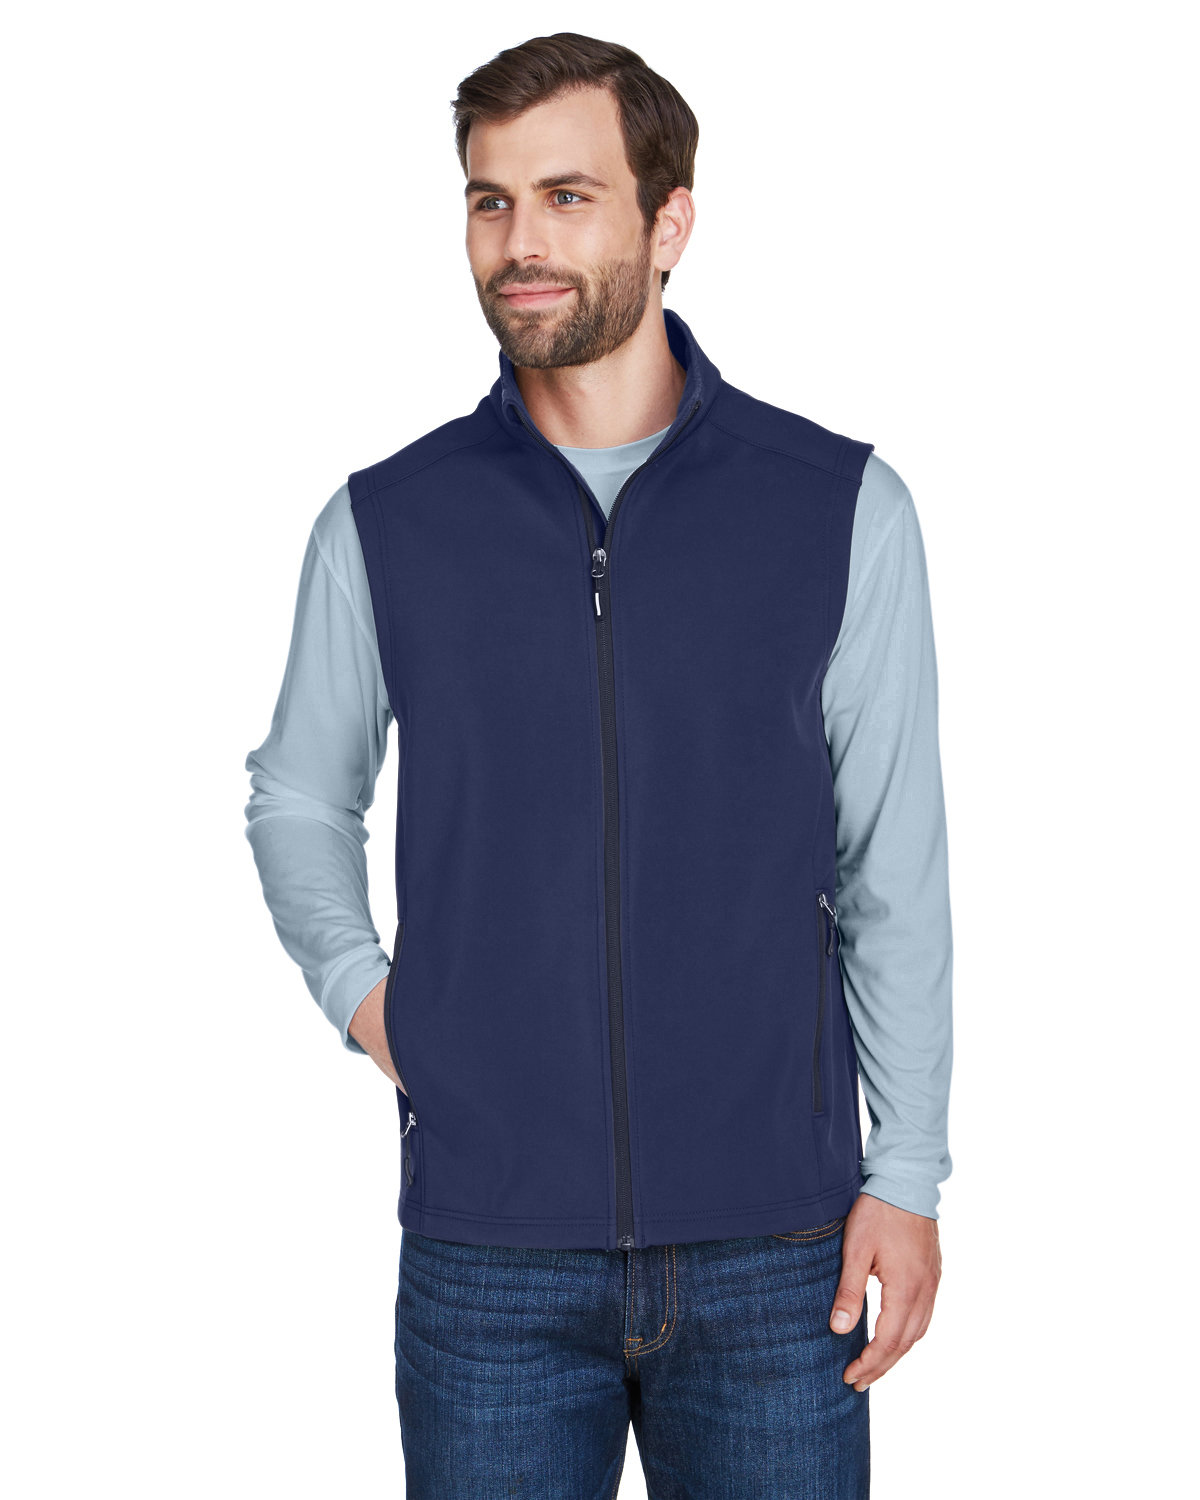 Core 365 Men's Cruise Two-Layer Fleece Bonded Soft Shell Vest CLASSIC NAVY 